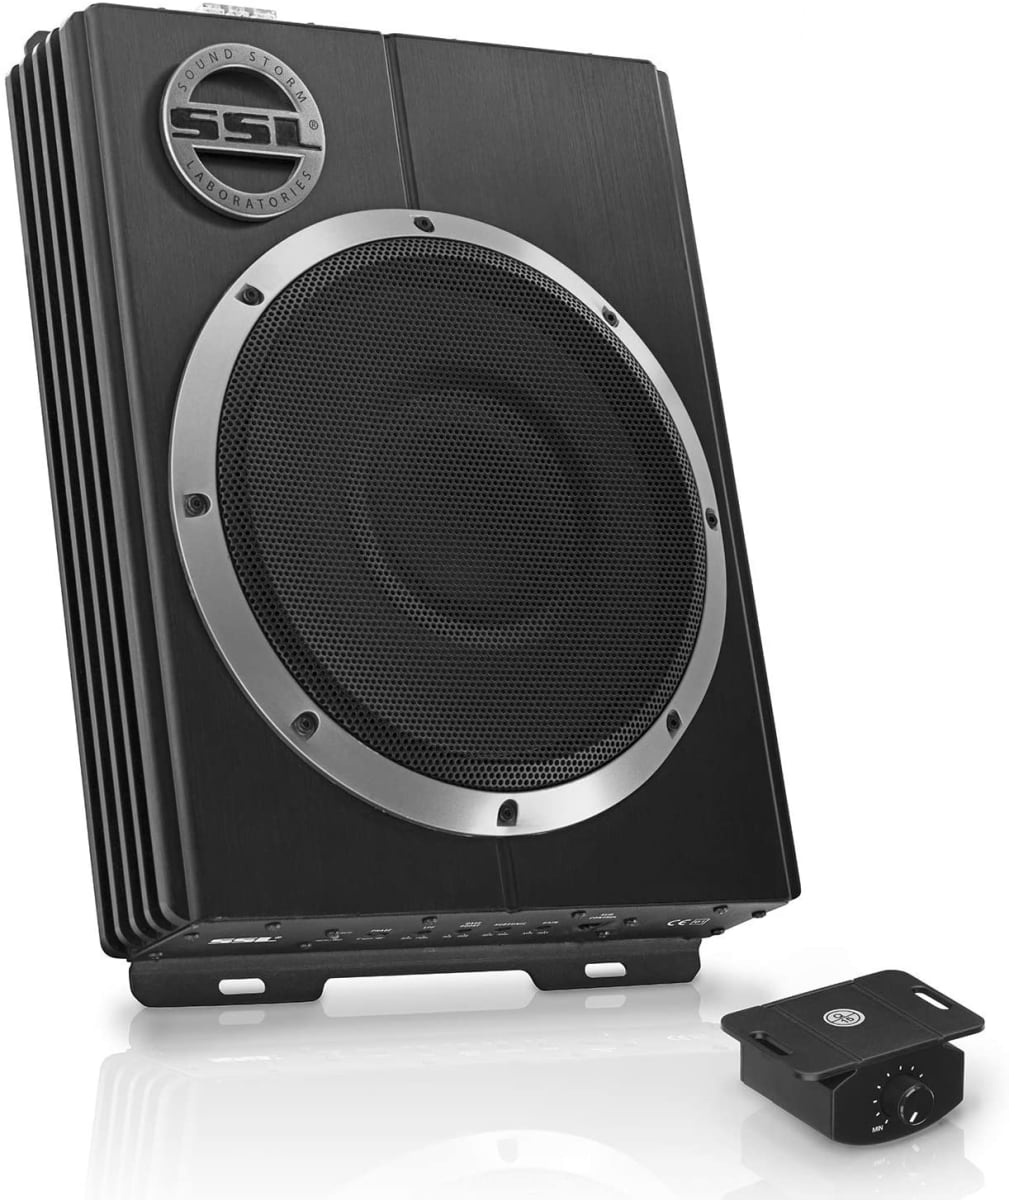 Laboratories LOPRO10 Amplified Car Subwoofer